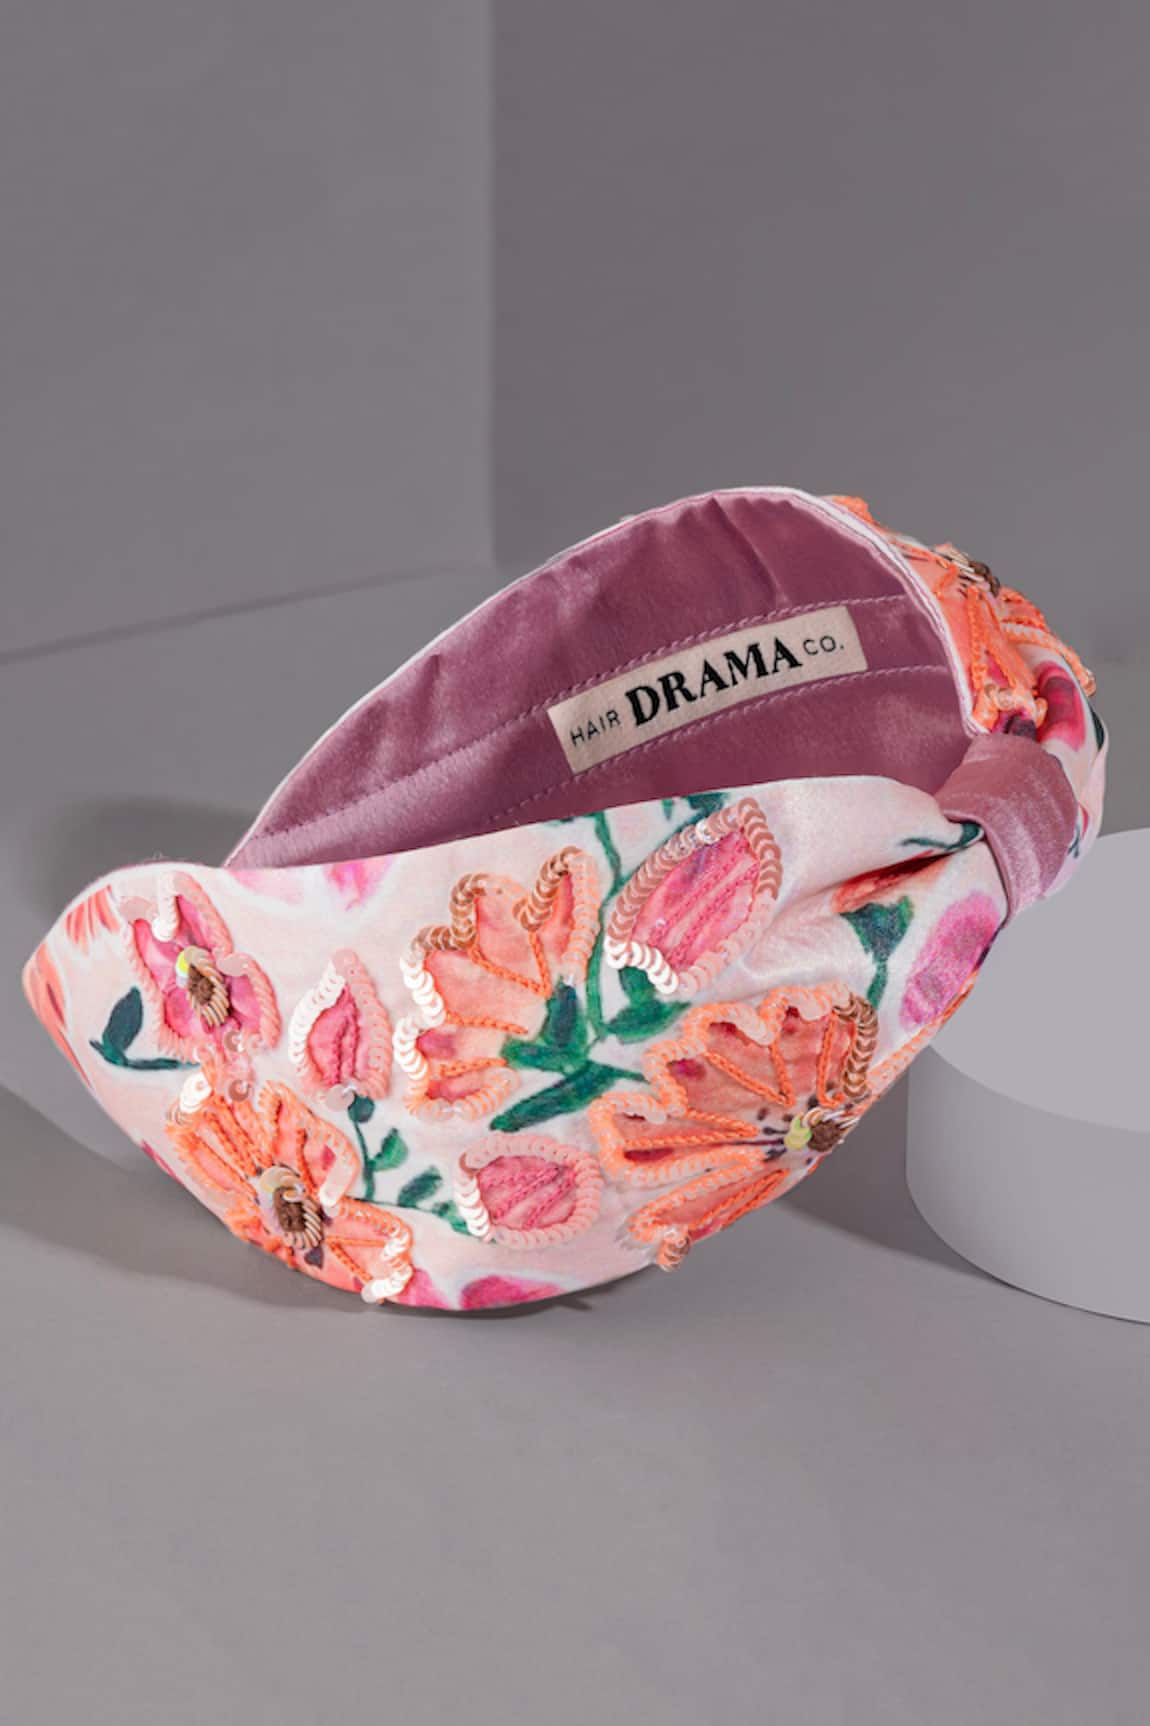 Hair Drama Co. Floral Knotted Hair Band